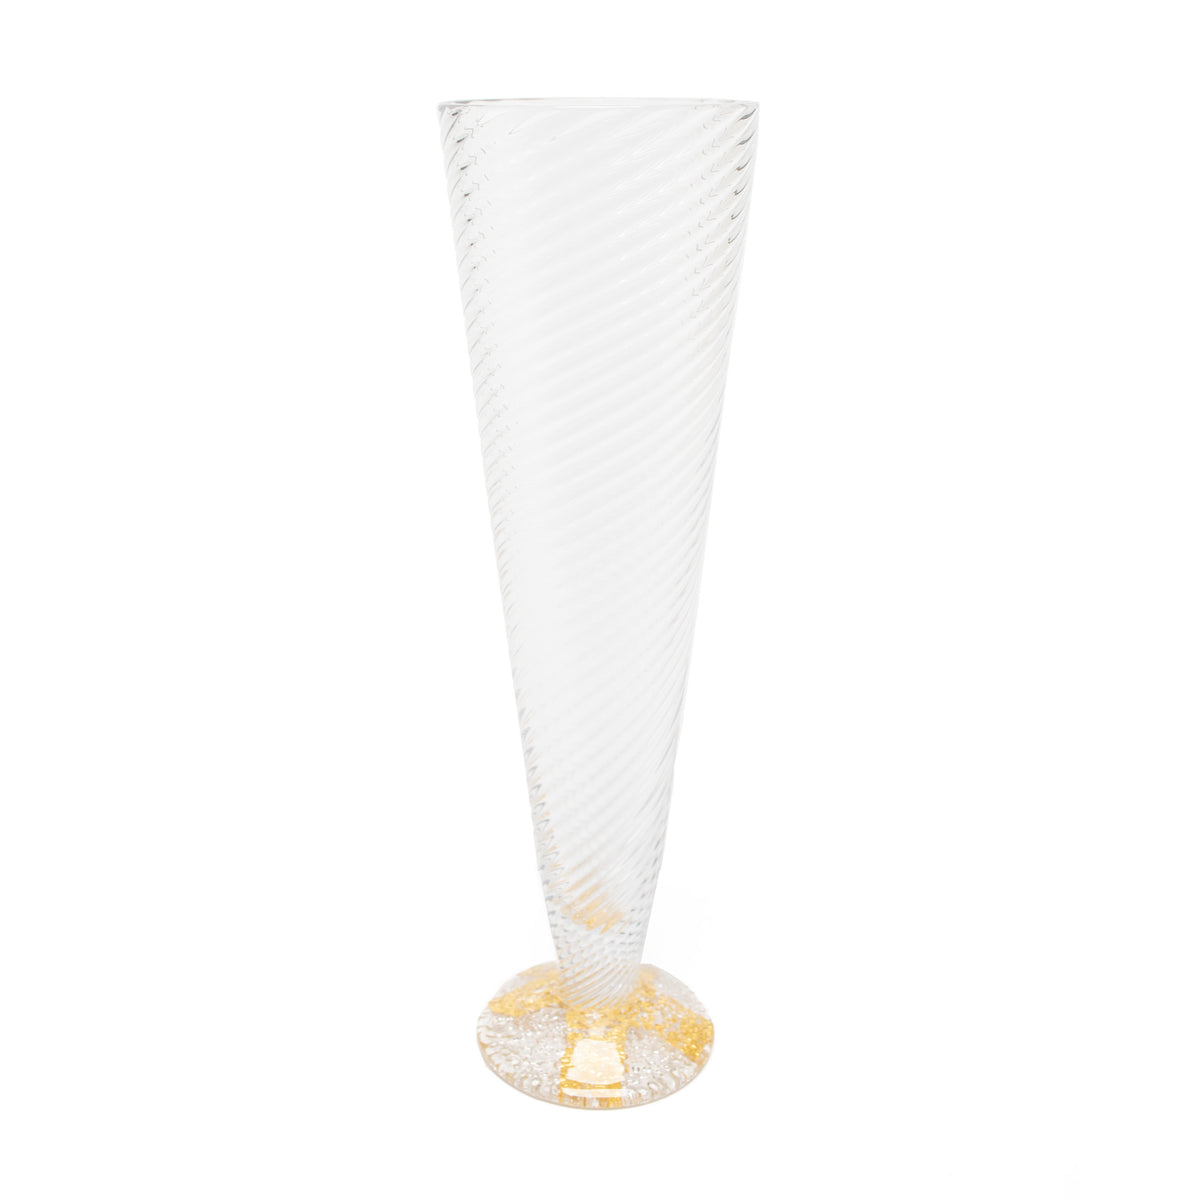 Champagne Flute - Handblown Glass with Gold Leaf